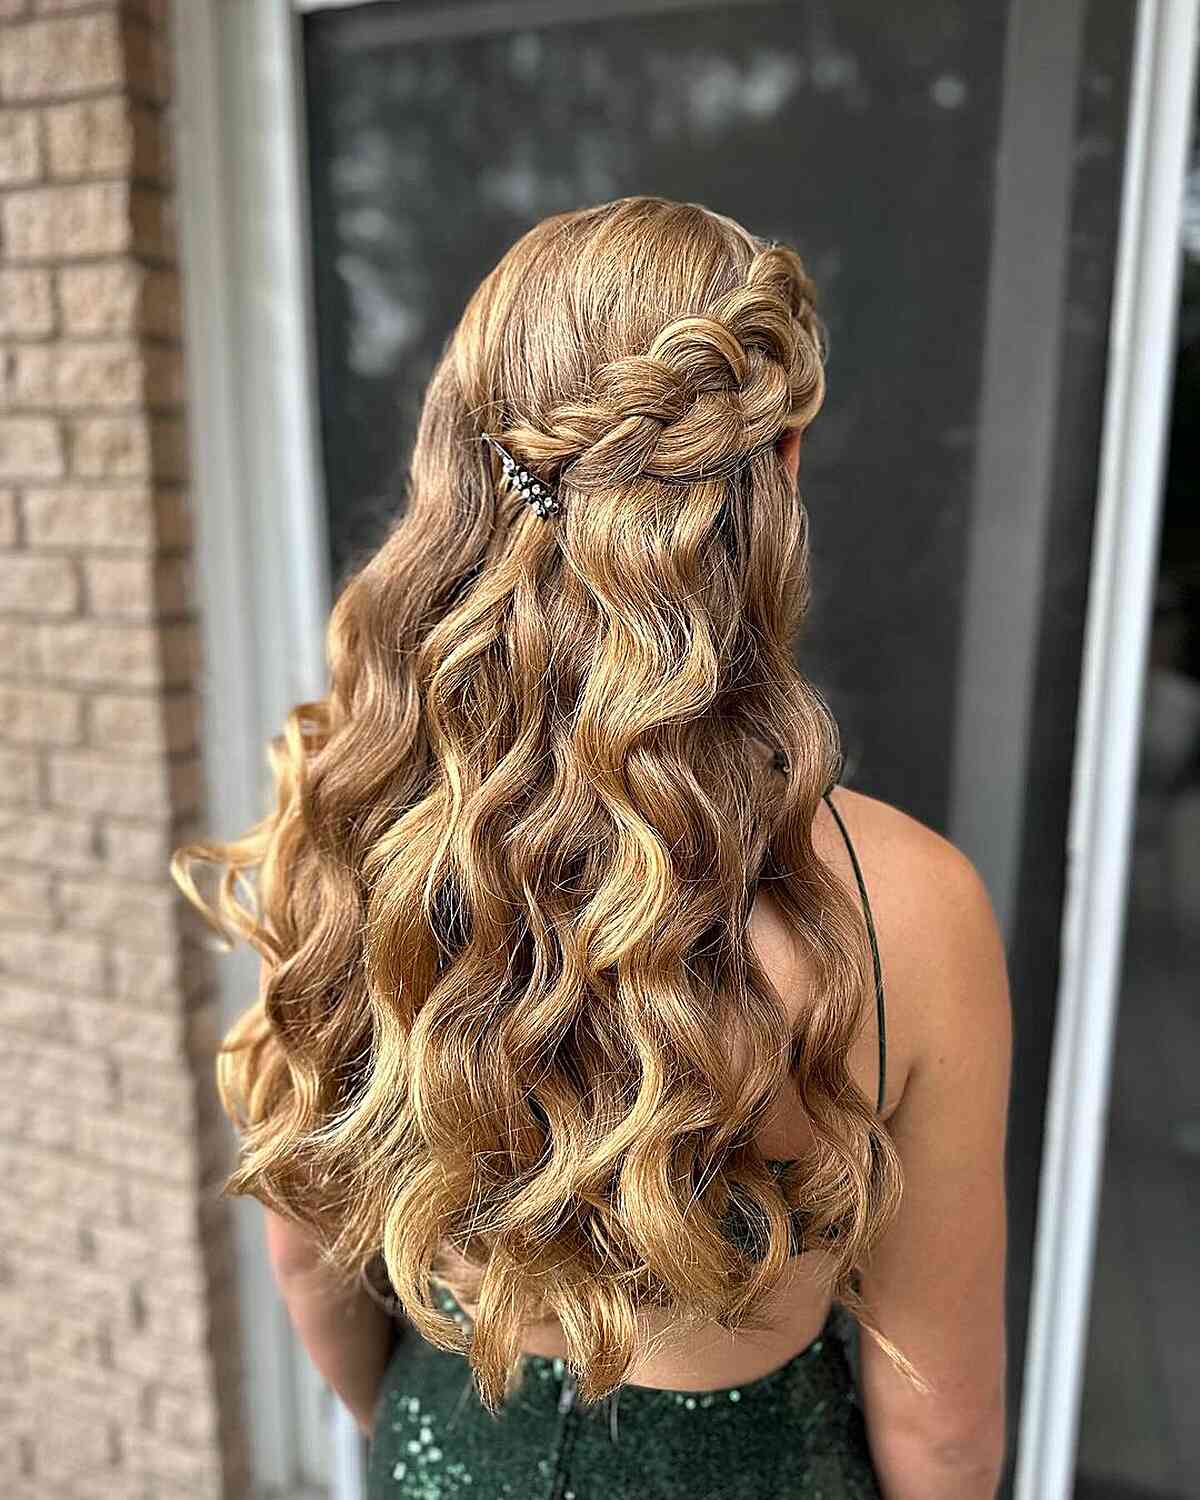 3 Easy Prom Hairstyles - YouTube